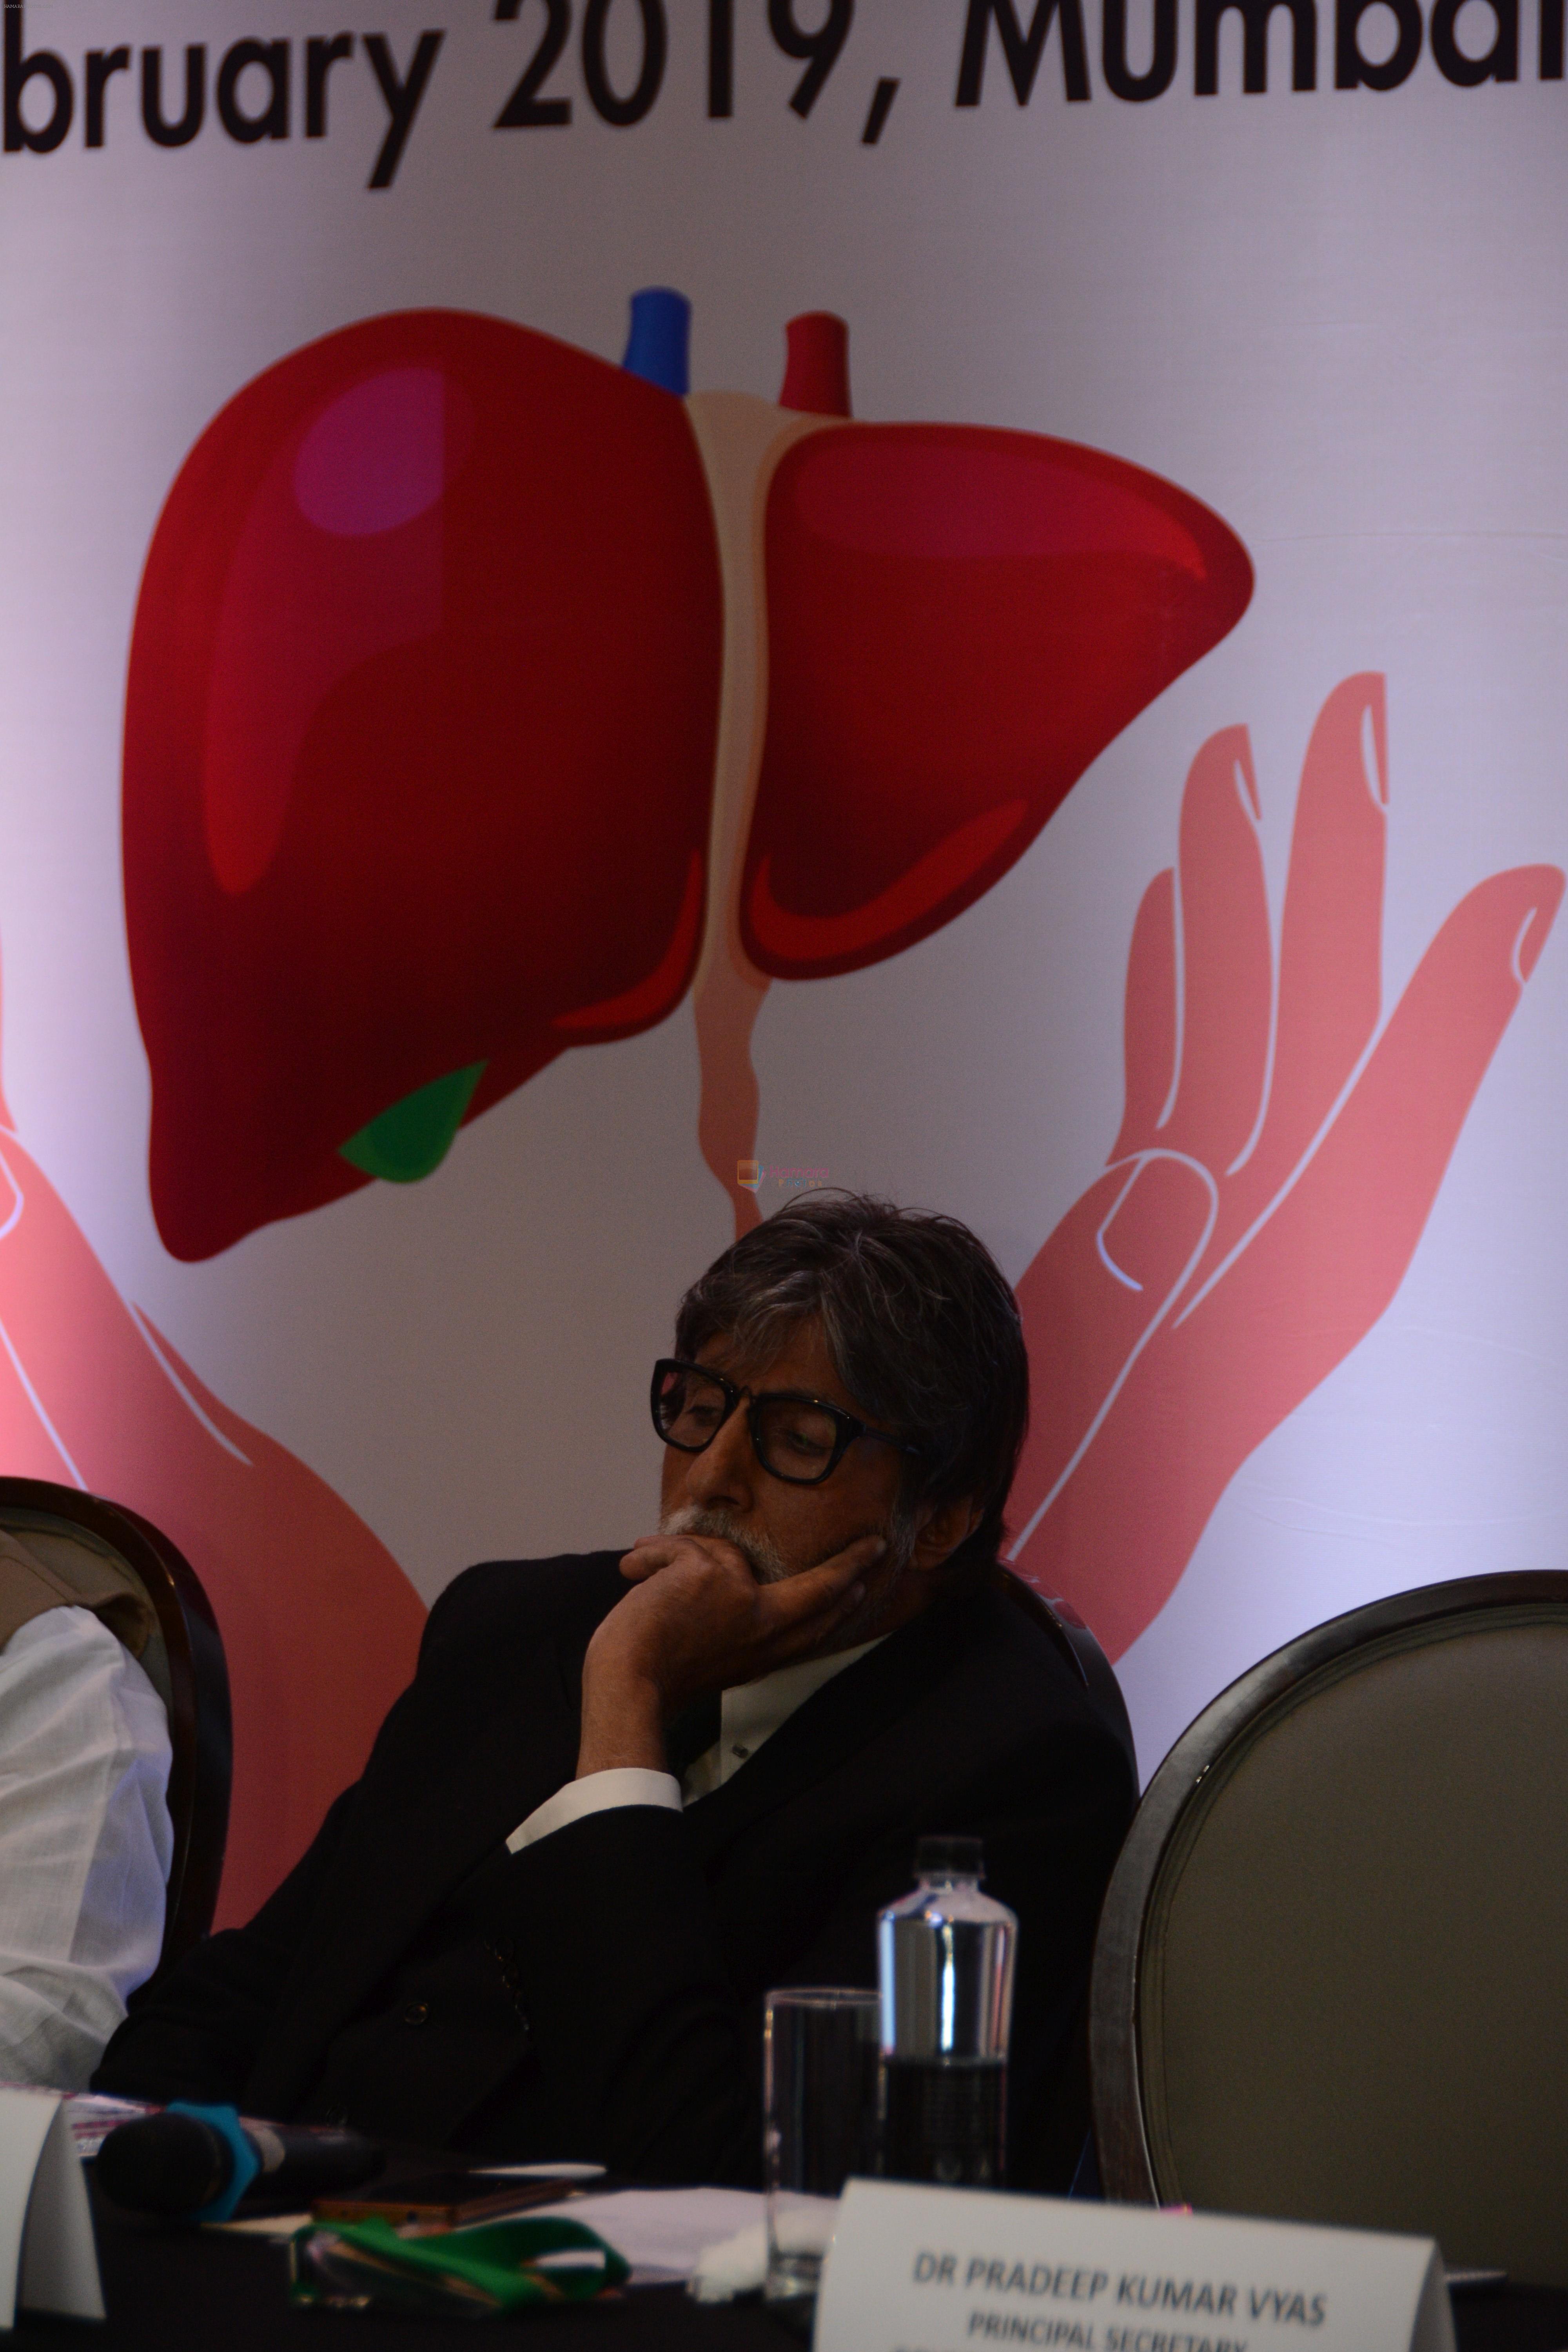 Amitabh Bachchan at the launch of National action plan on combating viral hepatitis in India on 25th Feb 2019